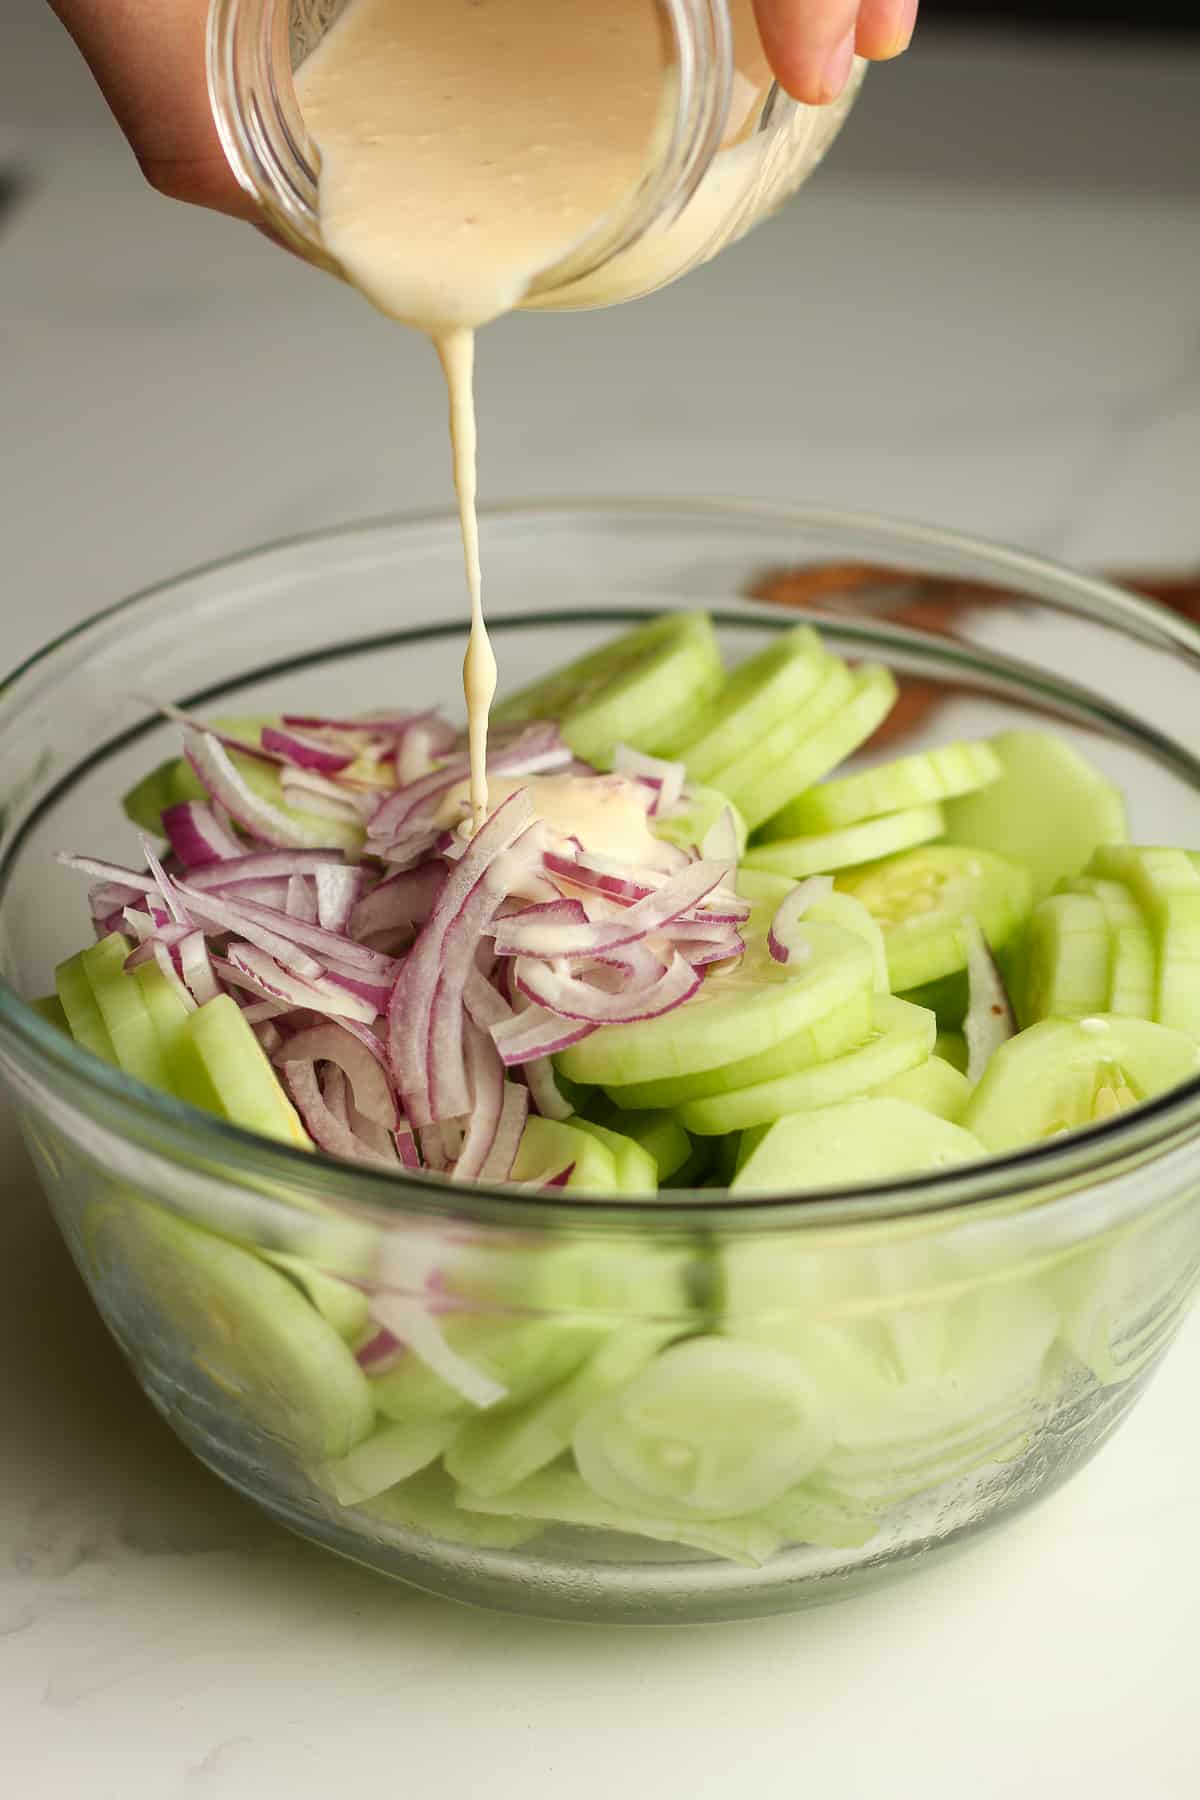 A jar of dressing being poured on a bowl of sliced cucumbers and onions.